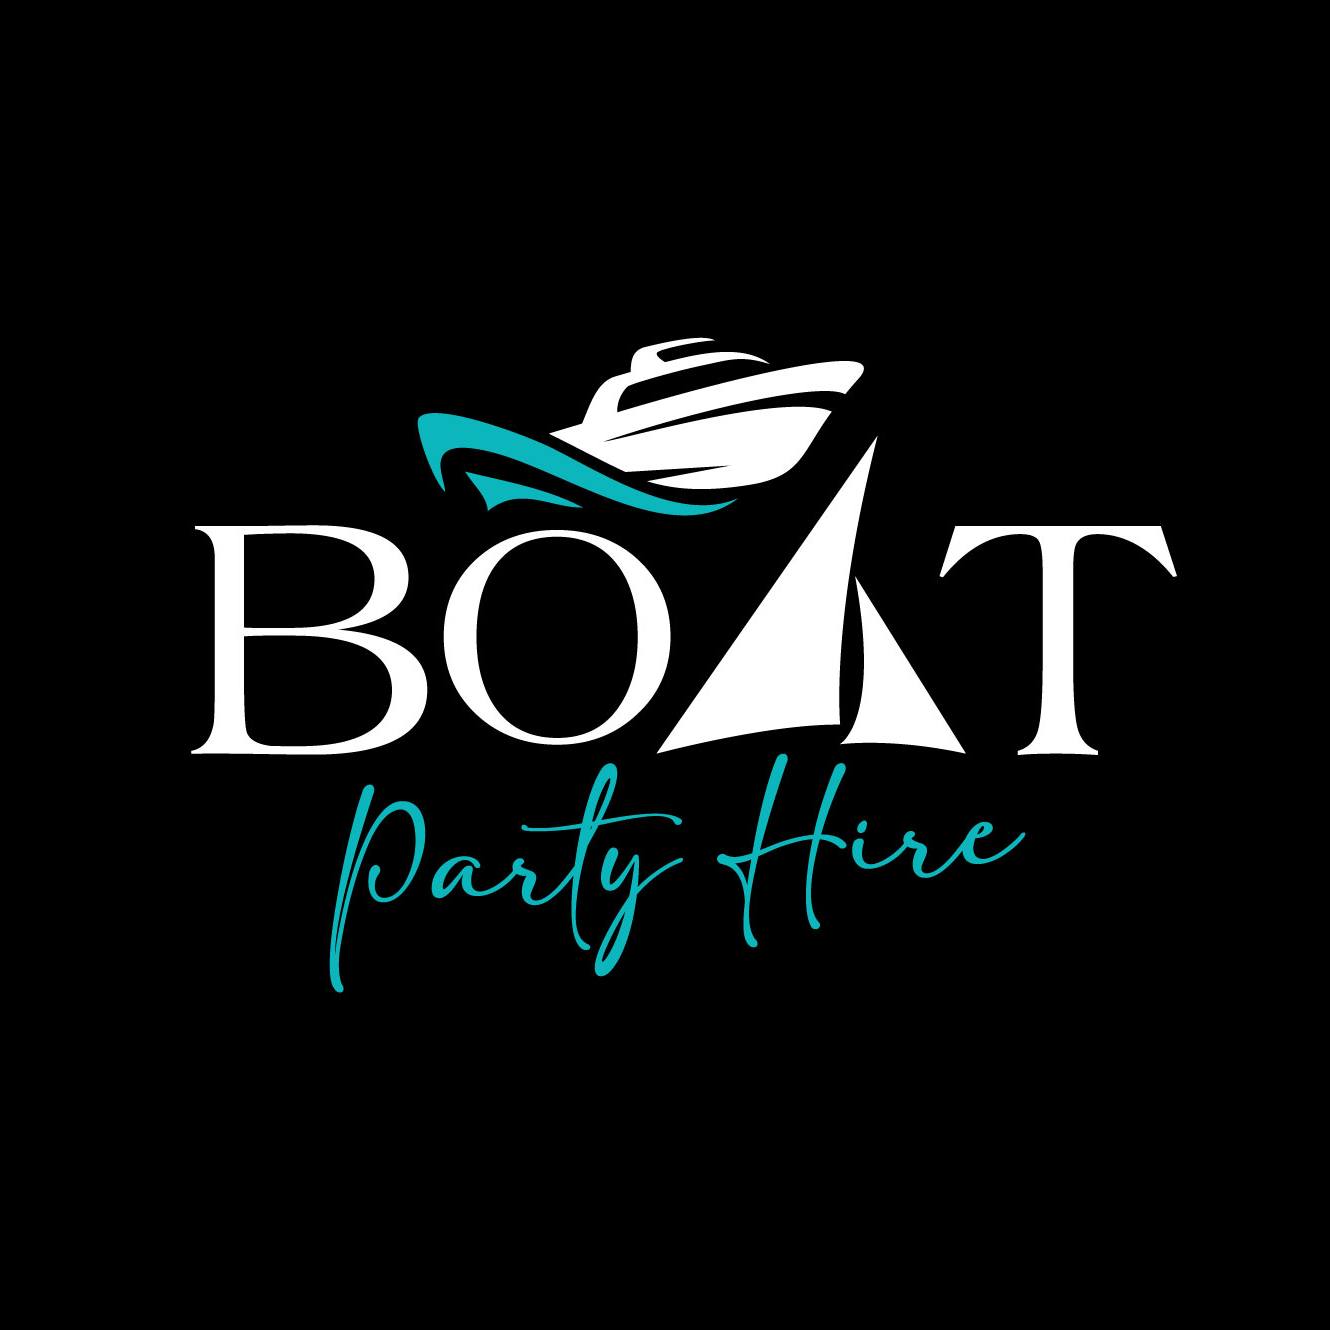 Contact Boat Party Hire